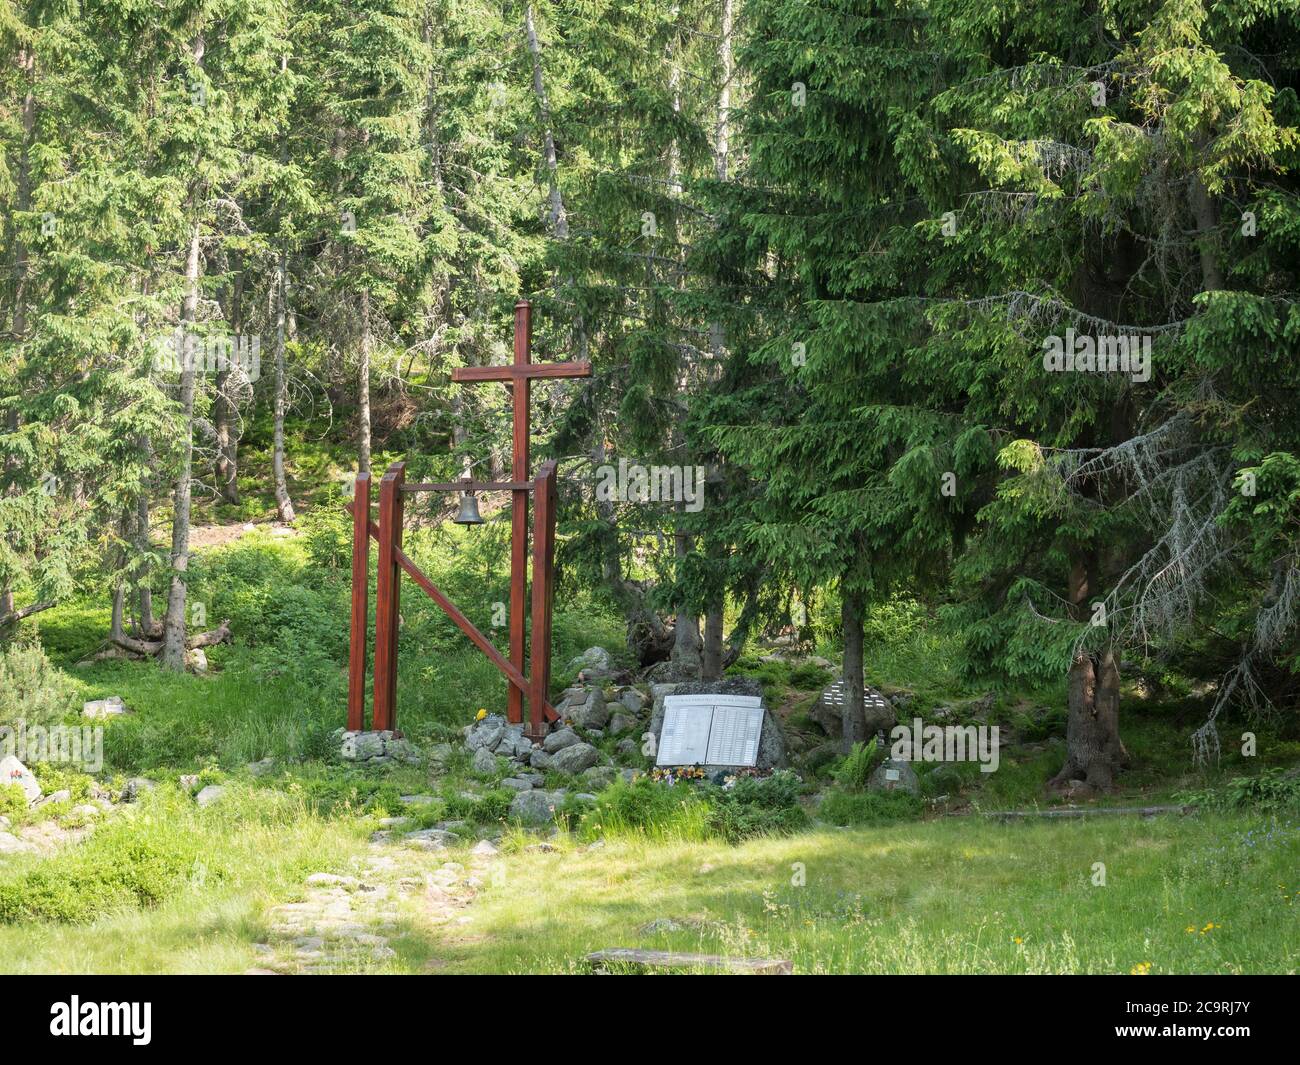 Slovakia, Western Tatra mountain, July 2, 2019: Entrance to memorial to respect death climbers and hikers in tatra mountains.garden with cross and Stock Photo